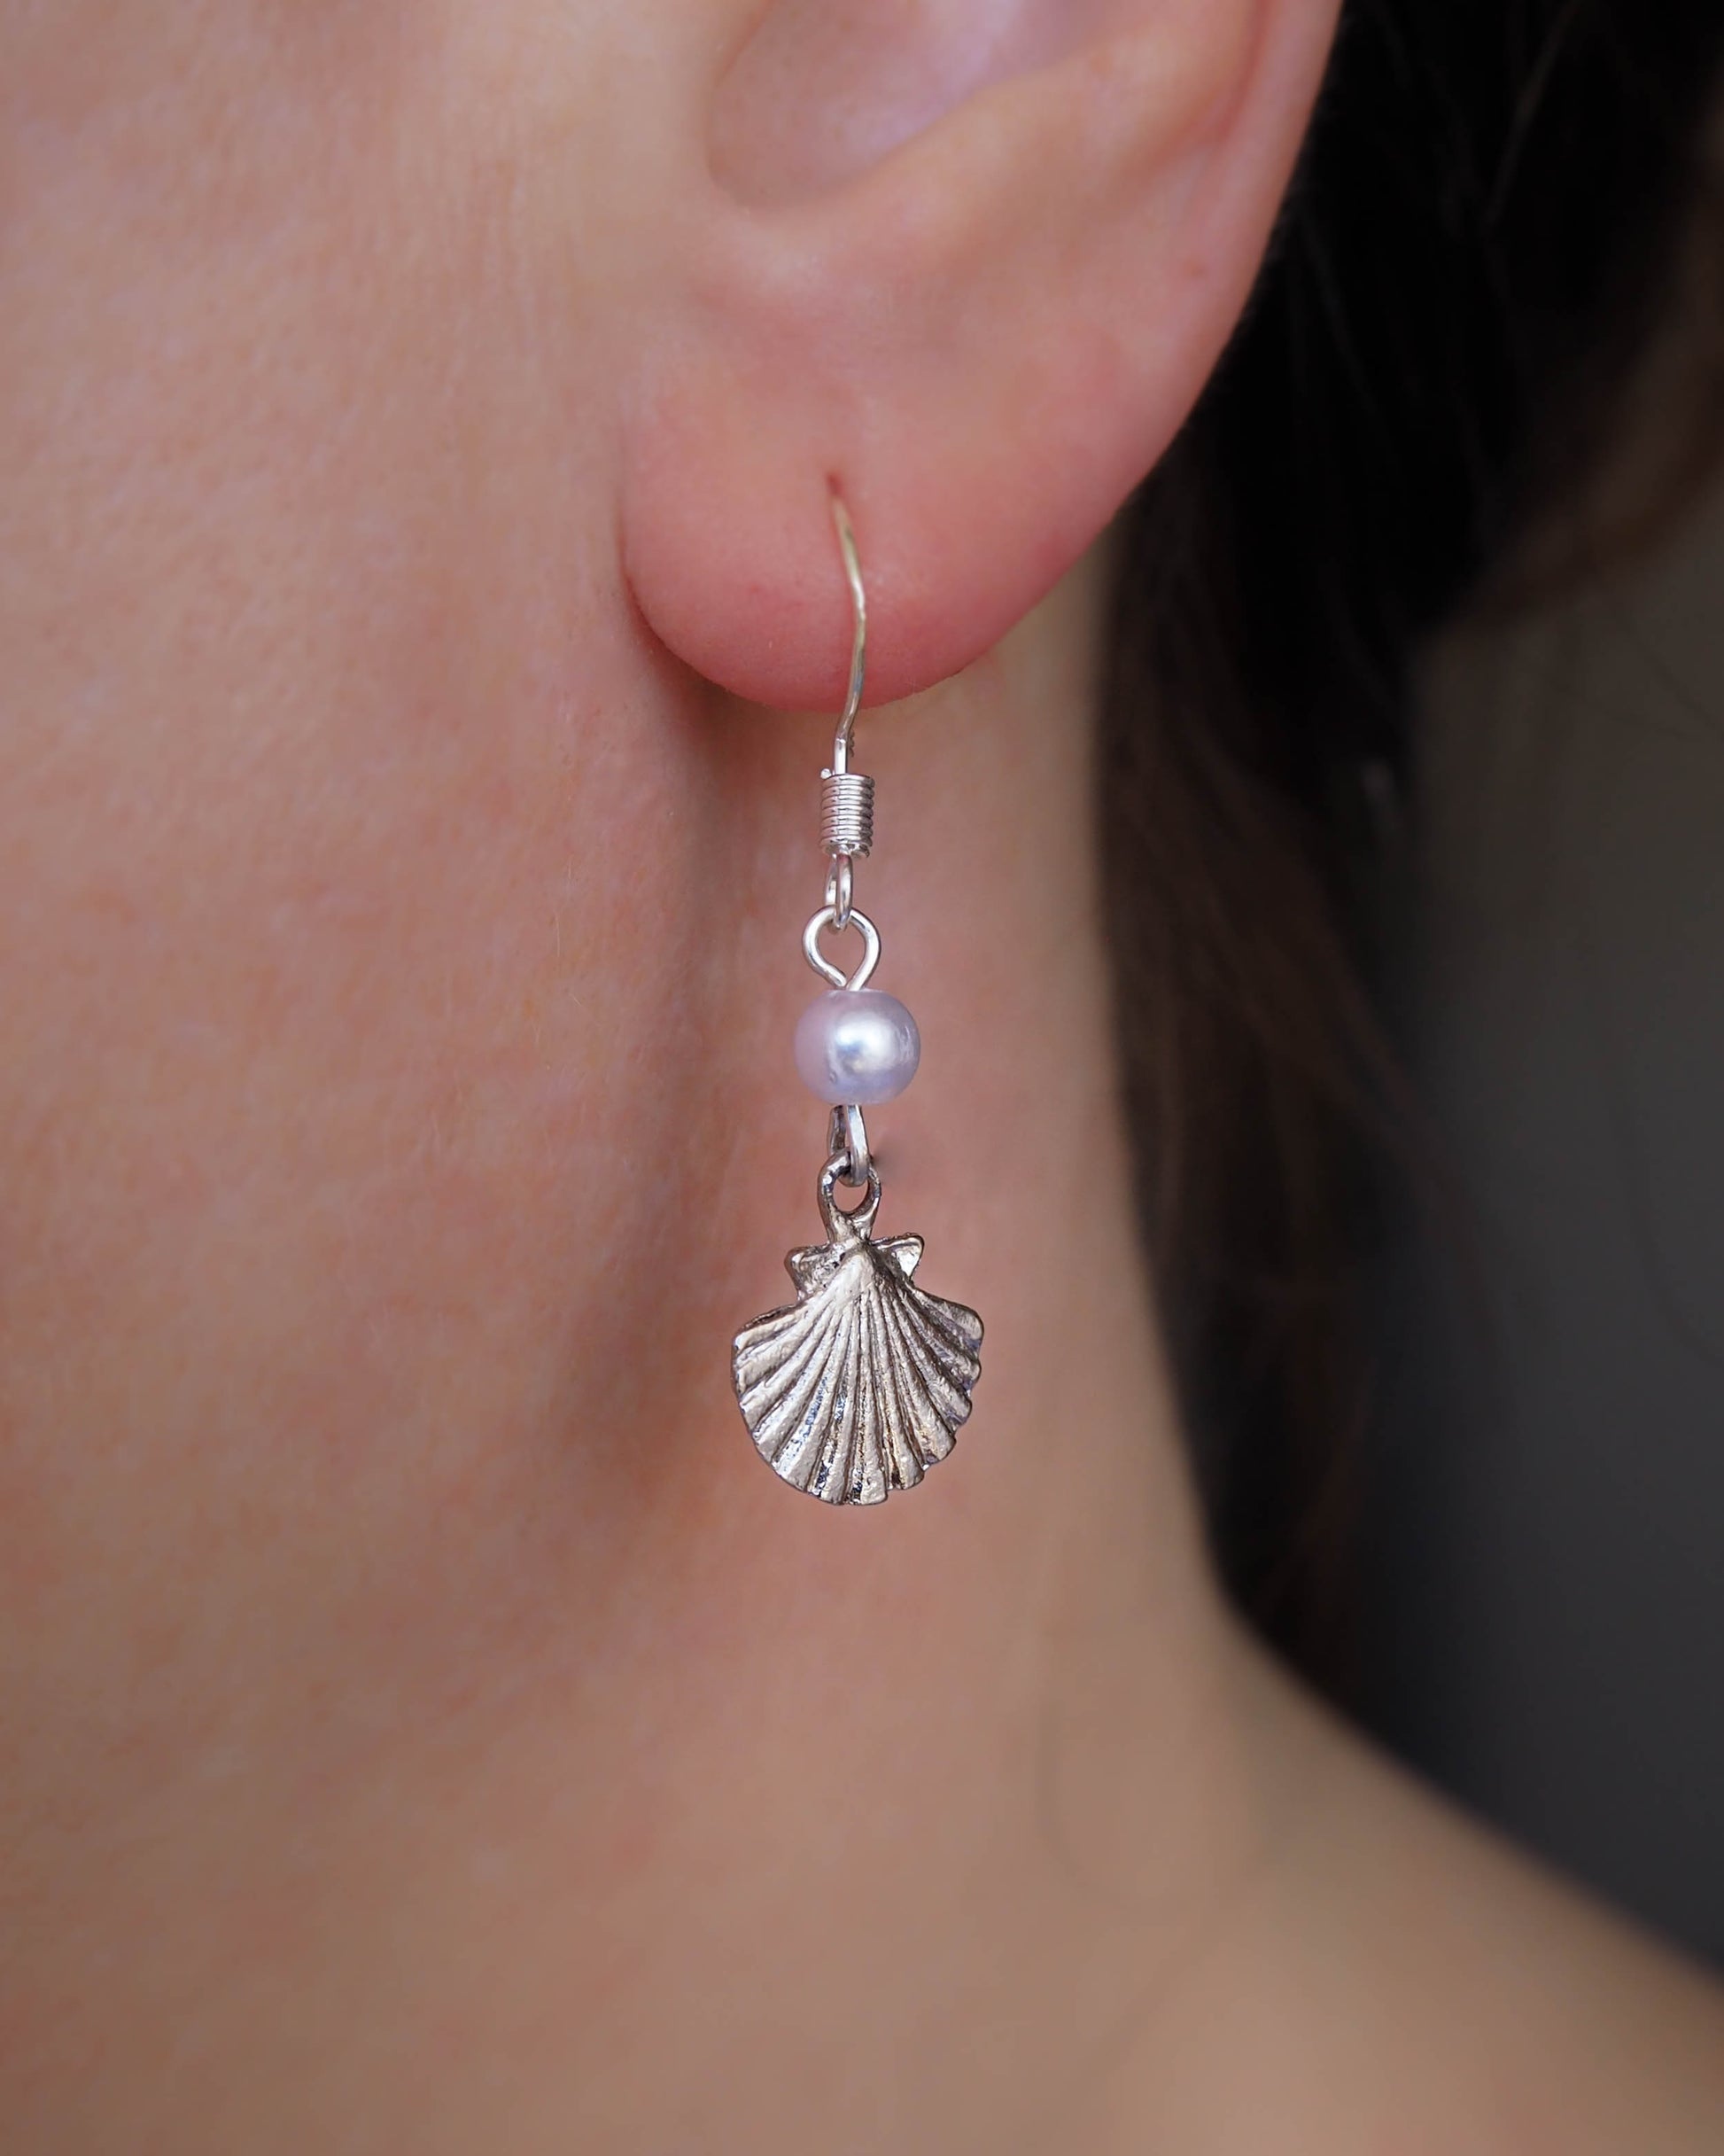 925 Silver Earrings with Pearl Beads and Silver Seashell - Beach-Inspired Elegance